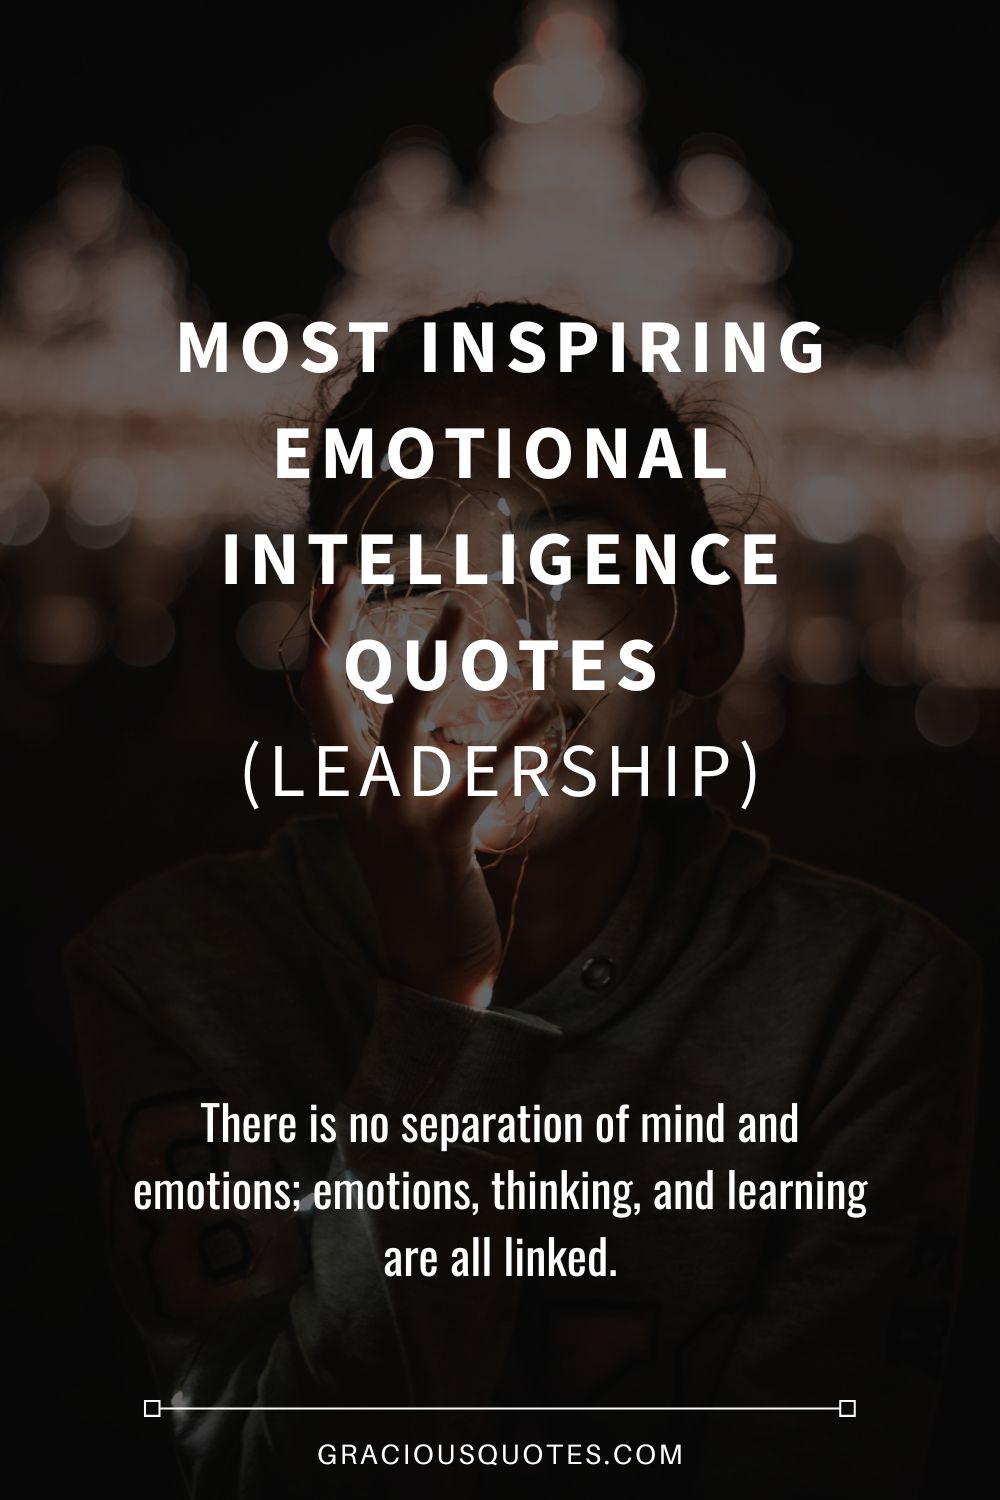 Most Inspiring Emotional Intelligence Quotes (LEADERSHIP) - Gracious Quotes